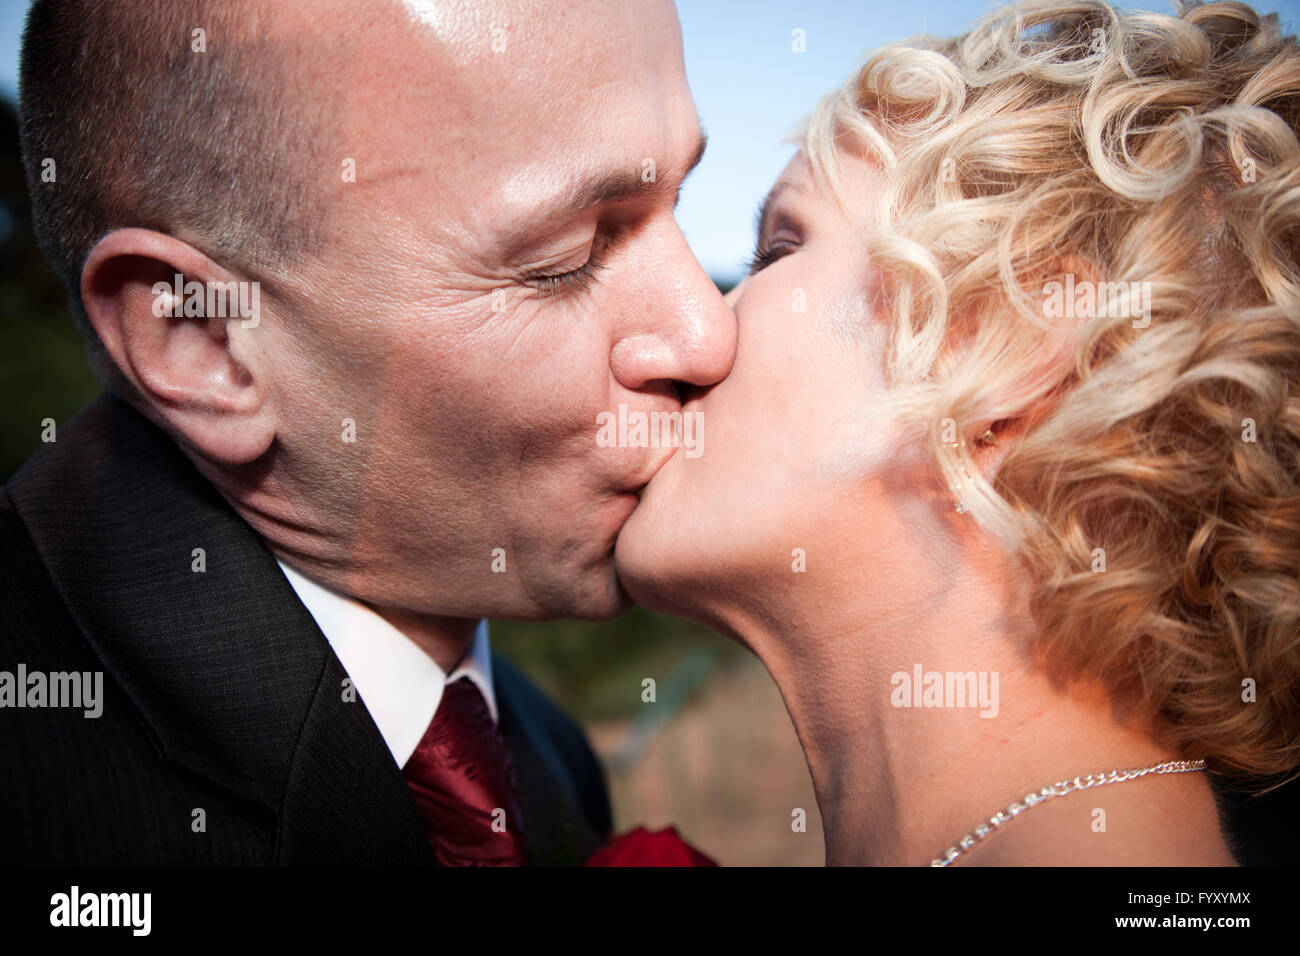 Happy bride and groom kissing Stock Photo